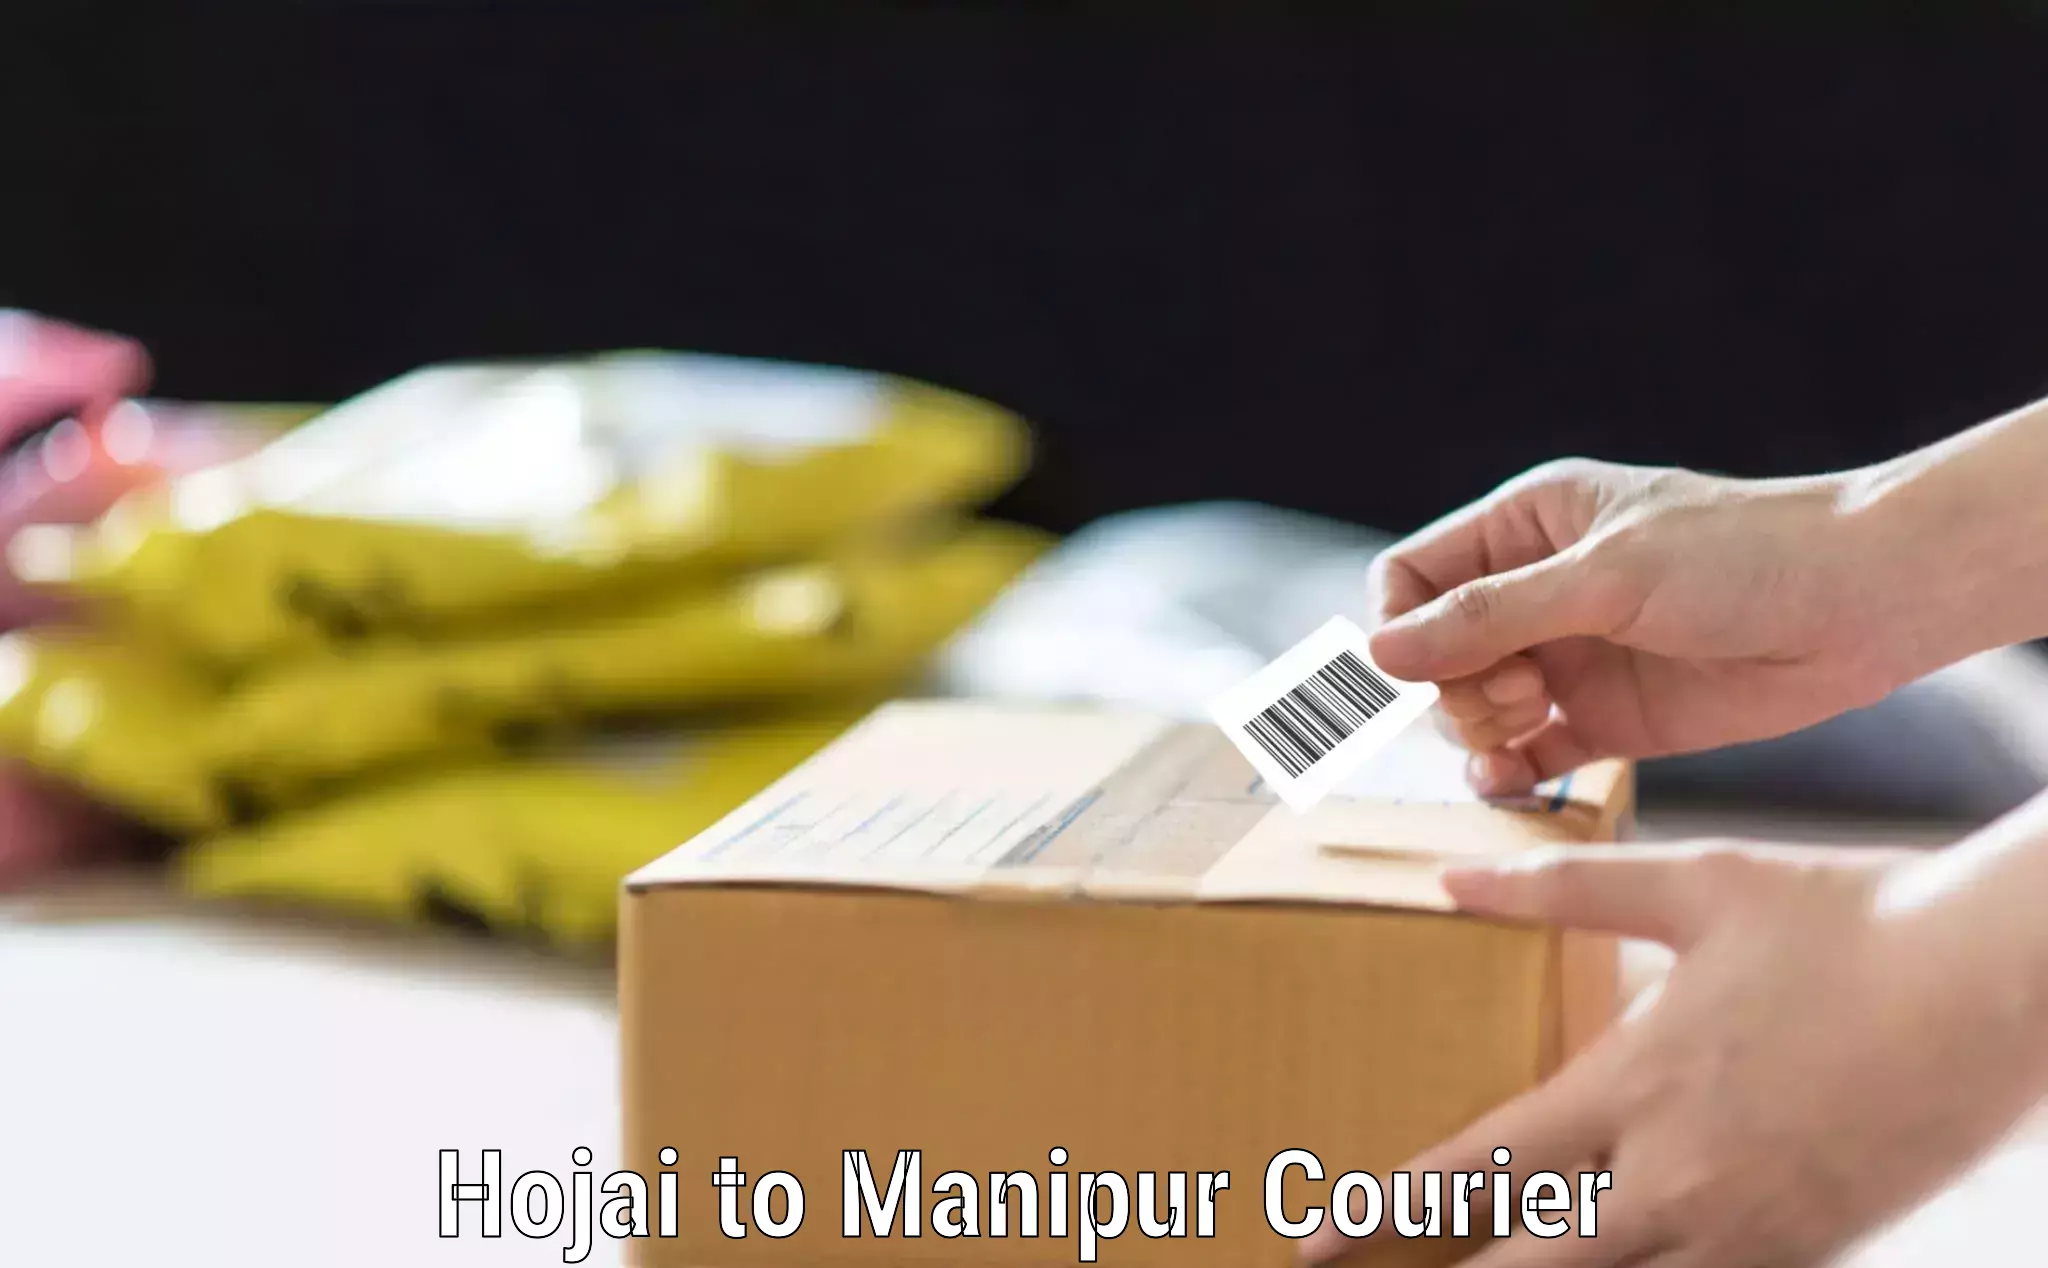 Online luggage shipping booking Hojai to Manipur